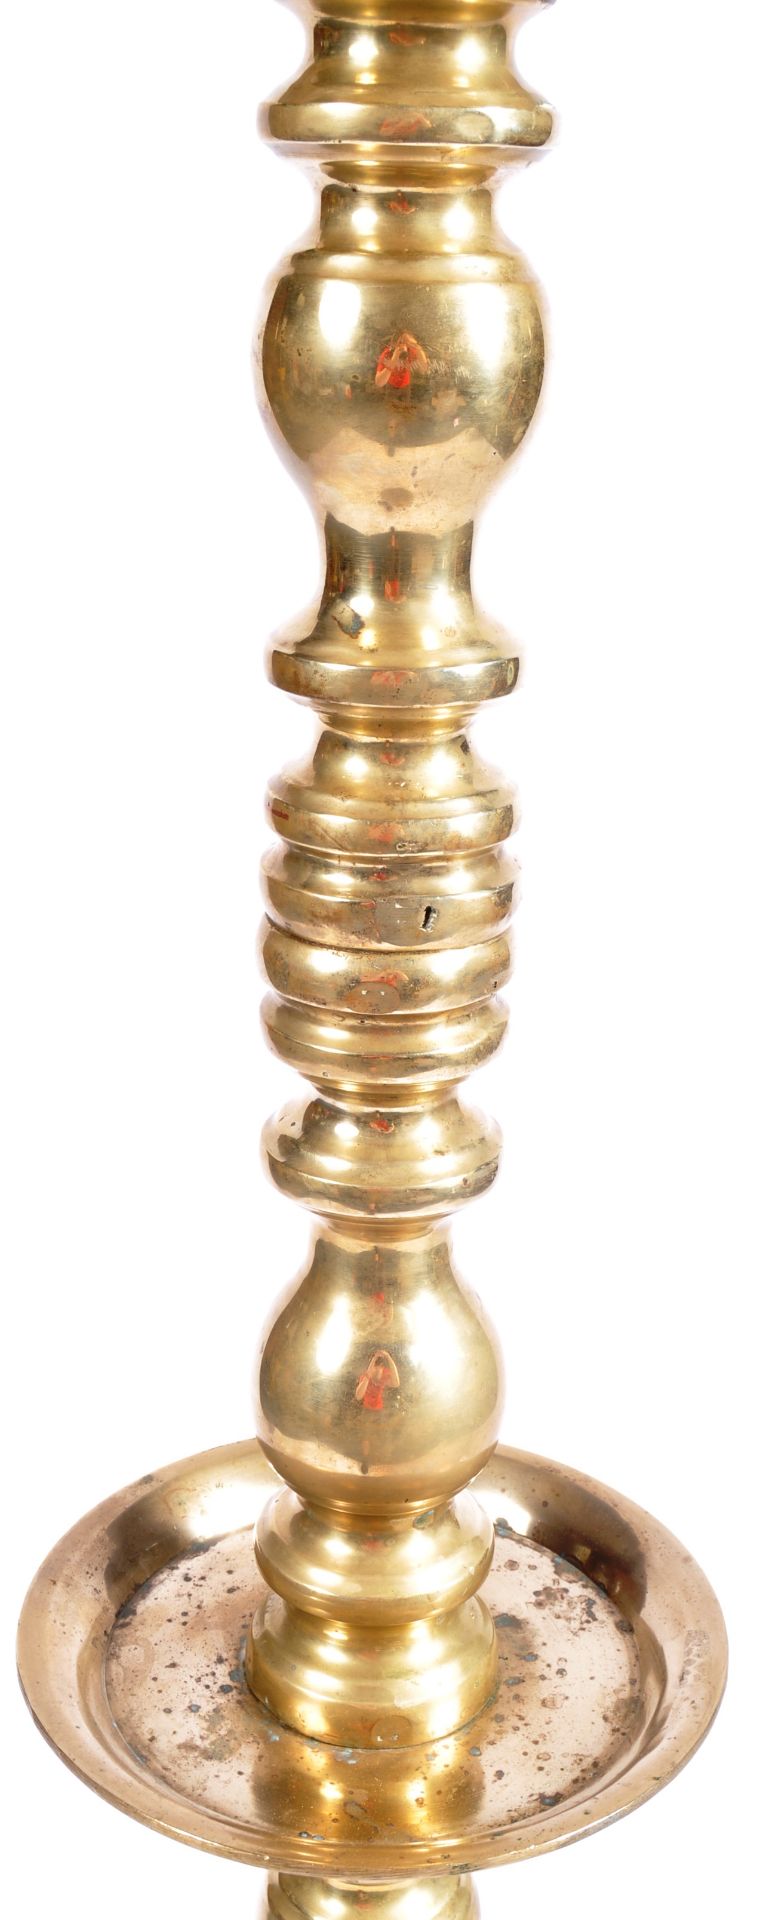 LARGE HEAVY FLOOR STANDING DUTCH CANDLESTICK - Image 4 of 7